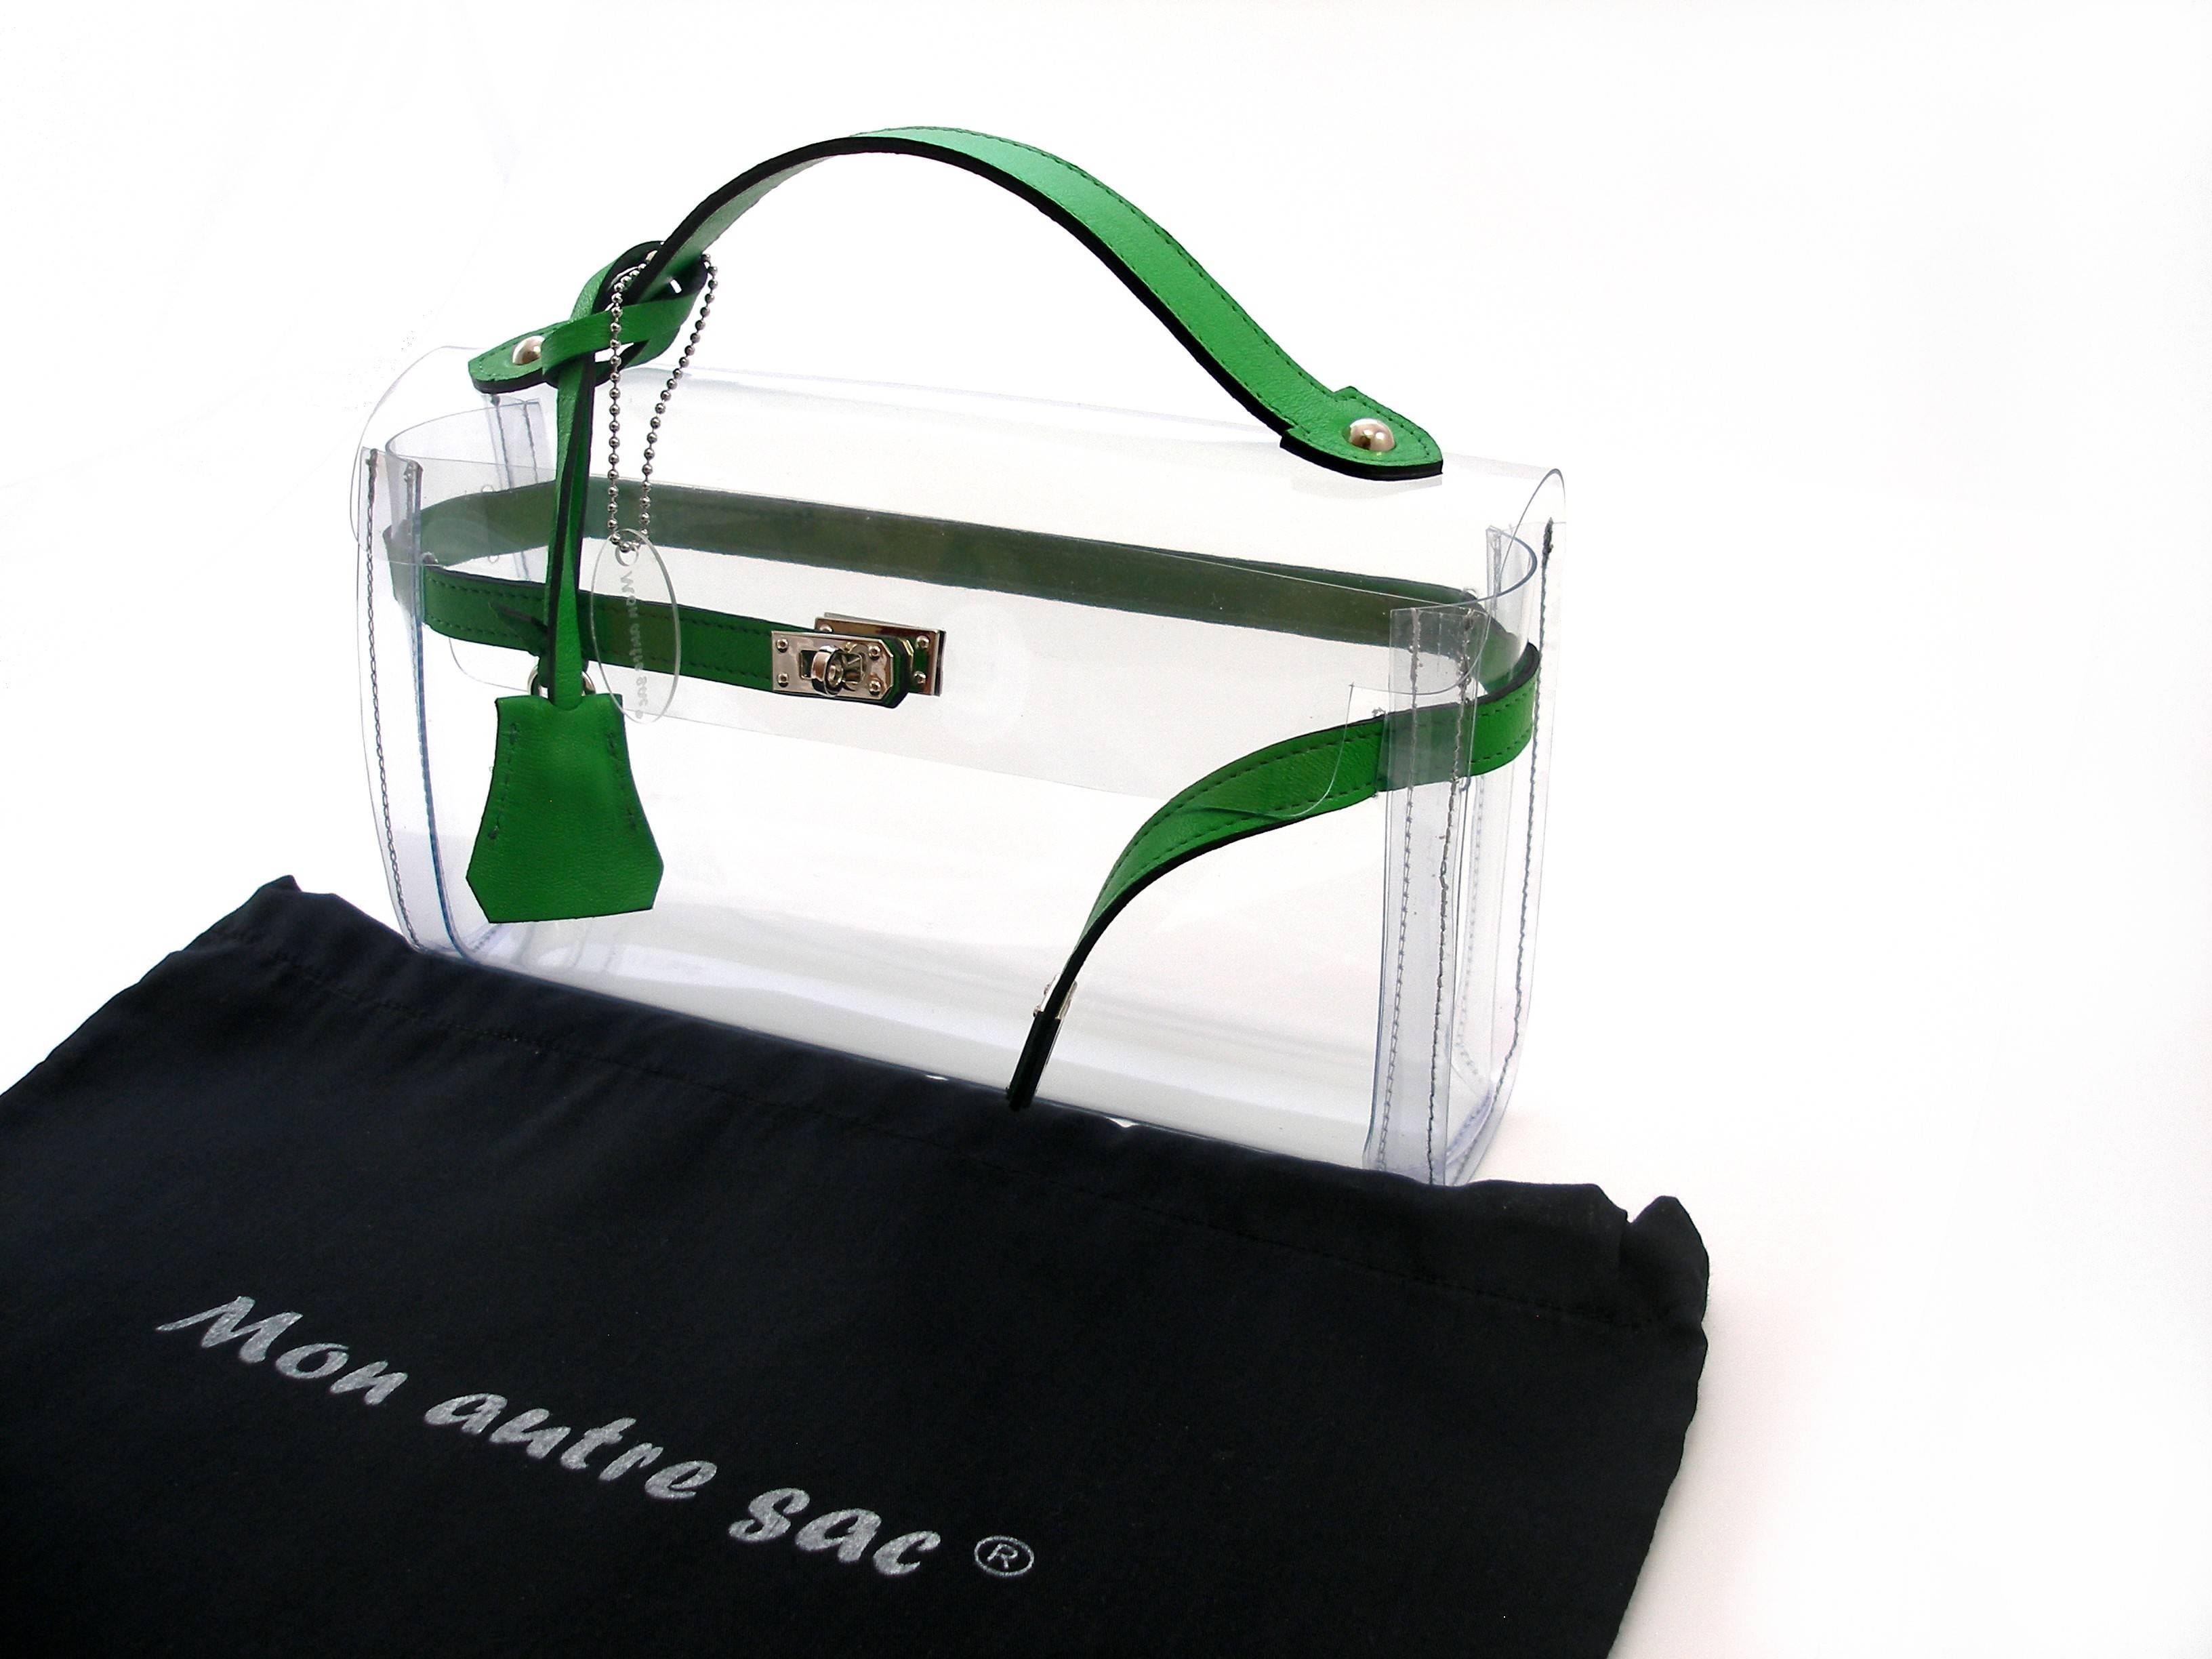 MA-GNI-FIC 
Our own production and brand filed Mon Autre Sac ® 
Highlight your luxury accessories!
Nice Pvc and Leather Bag 
Clutch Crystal 
Size :   L 25 X H 14 X P 6
Green leather 
Brand New
Its comes with dustbag  Mon Autre Sac ®
And Gift package